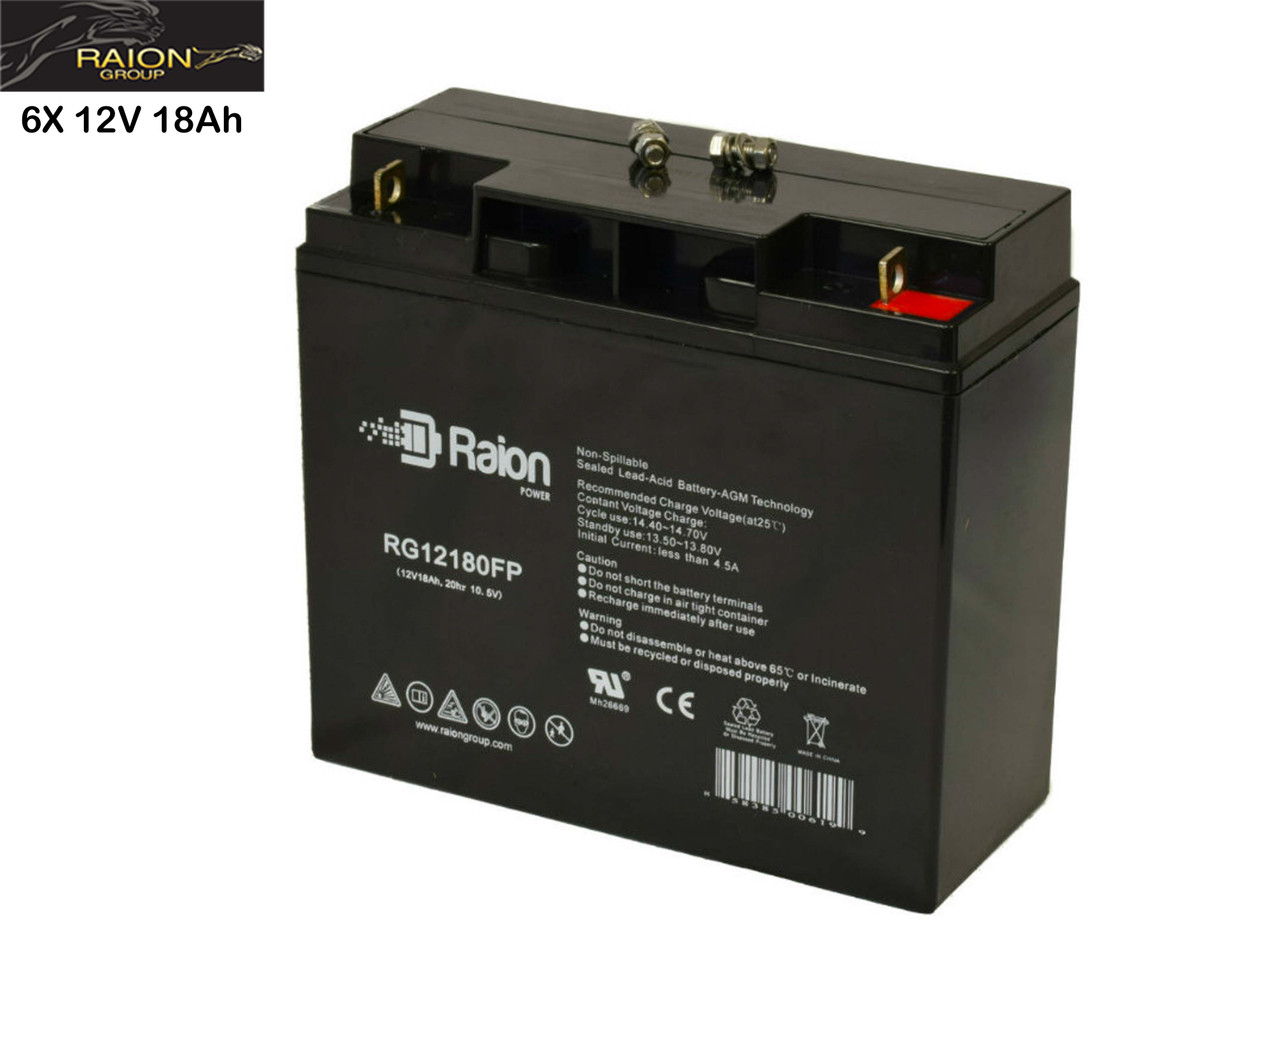 Raion Power Replacement 12V 18Ah Battery for Fun E-Cycle Mobility Scooter Q-71 - 6 Pack